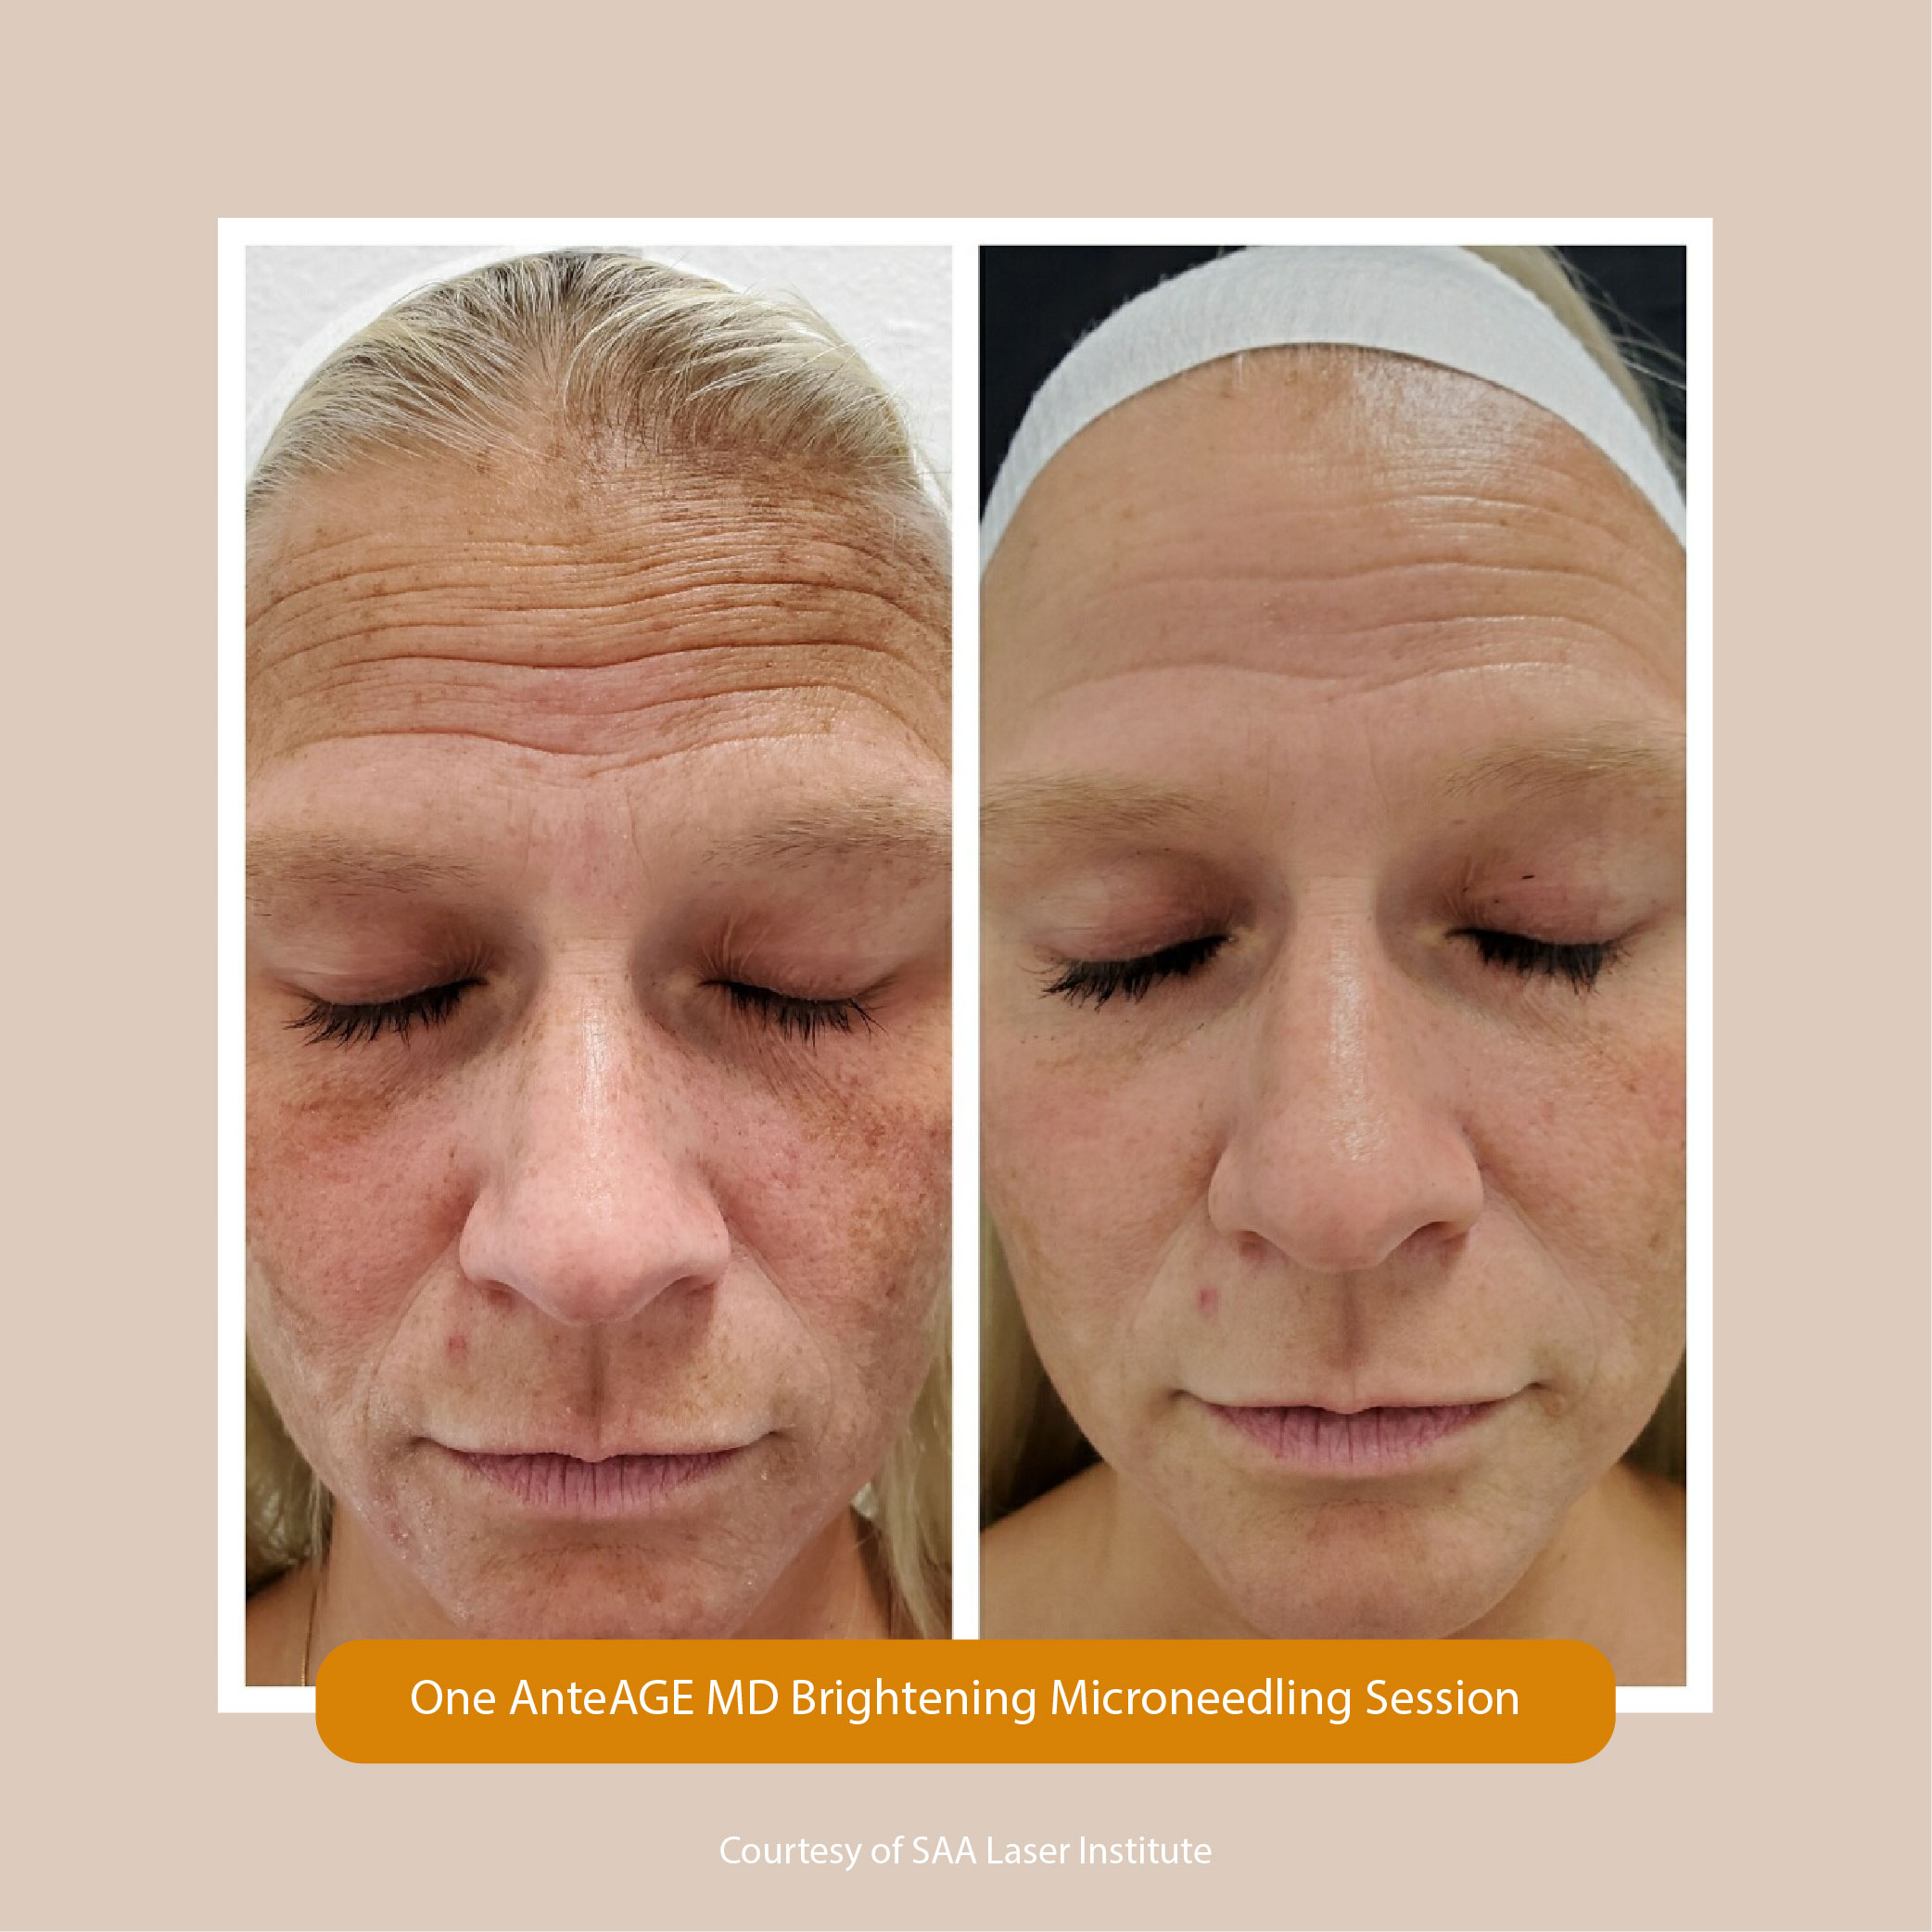 Microneedling with Stem Cells